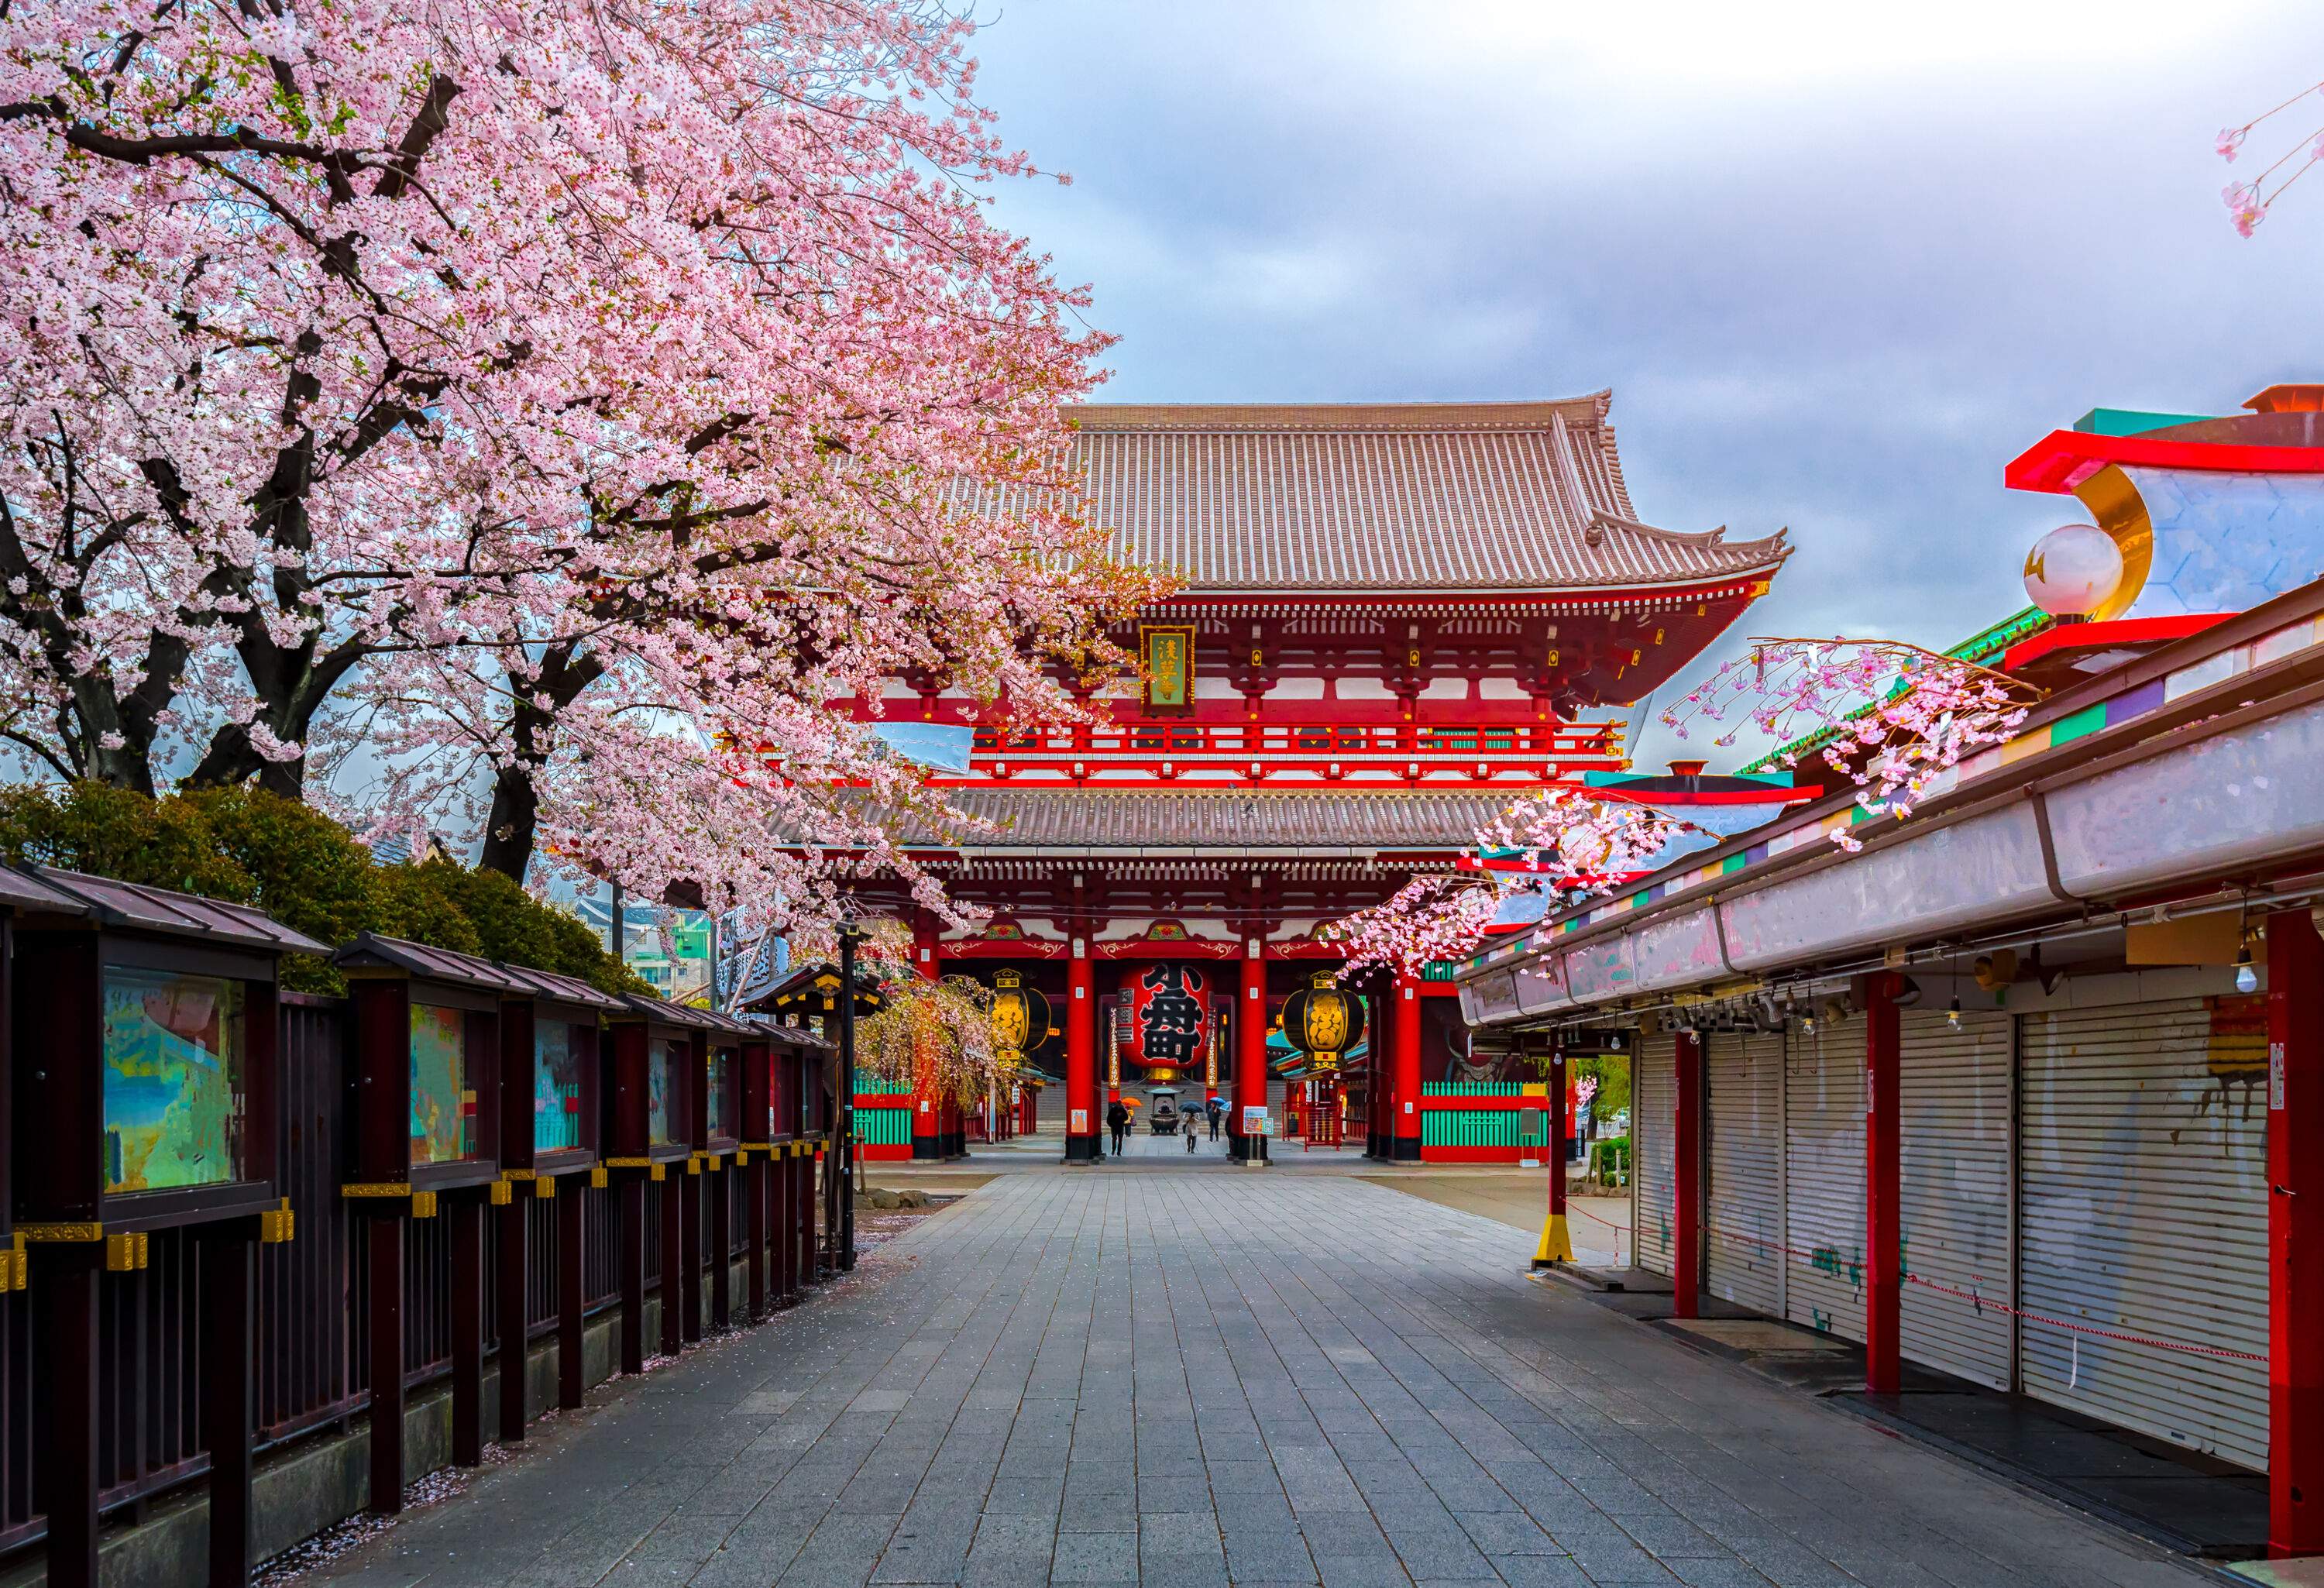 An empty path across closed stalls and cherry blossom trees towards a temple with pillared entrances and tiered roofs.